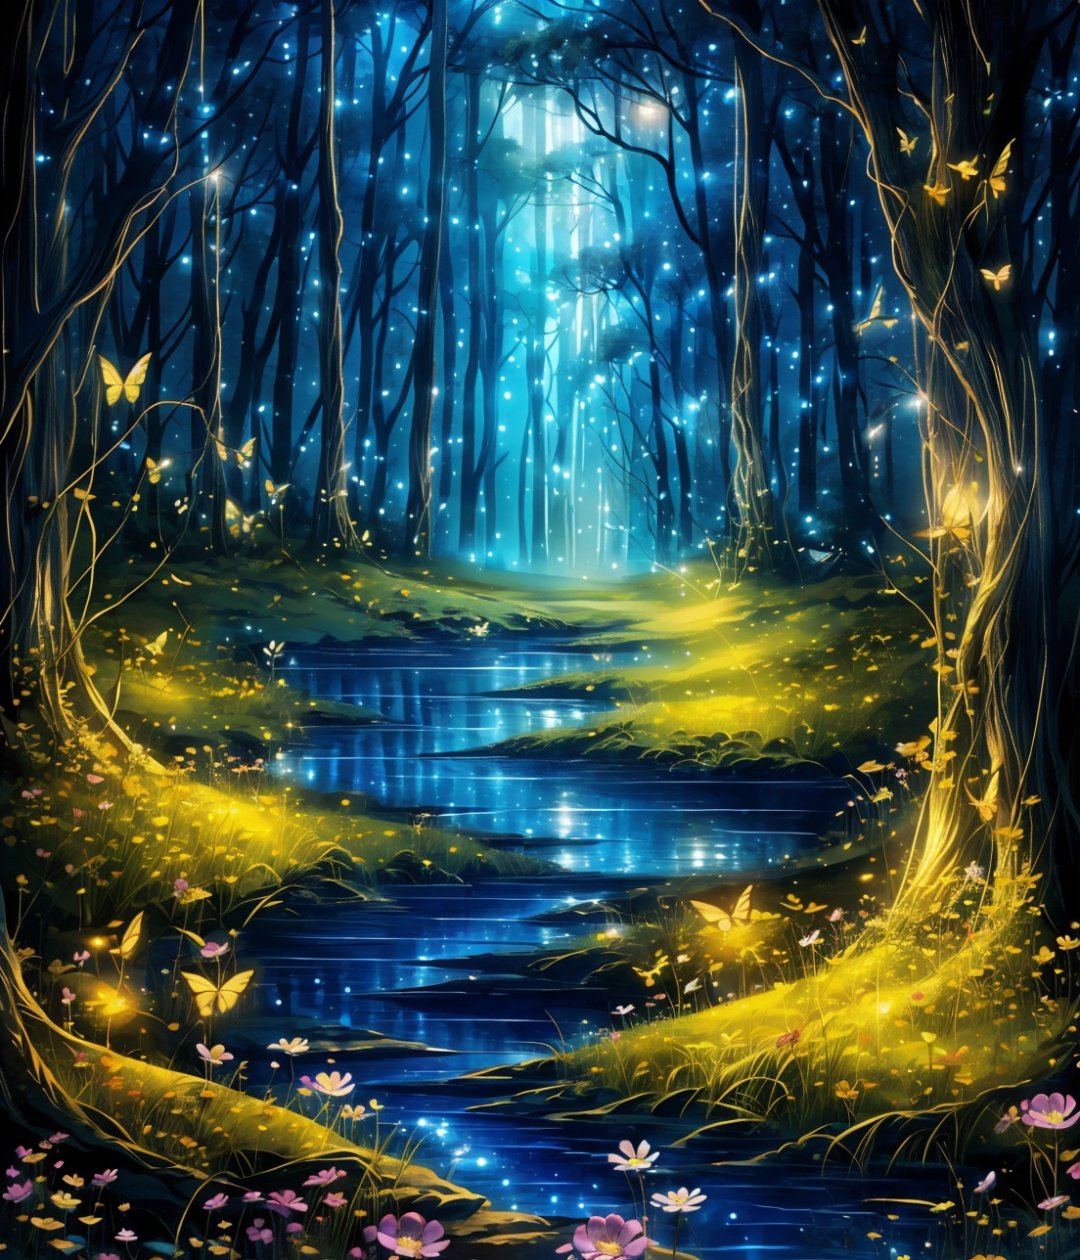  Best quality,8k,cg,scenery, nature, no humans, flower, forest, tree, water, outdoors, bug, bird, butterfly, night, fireflies, glowing, fantasy